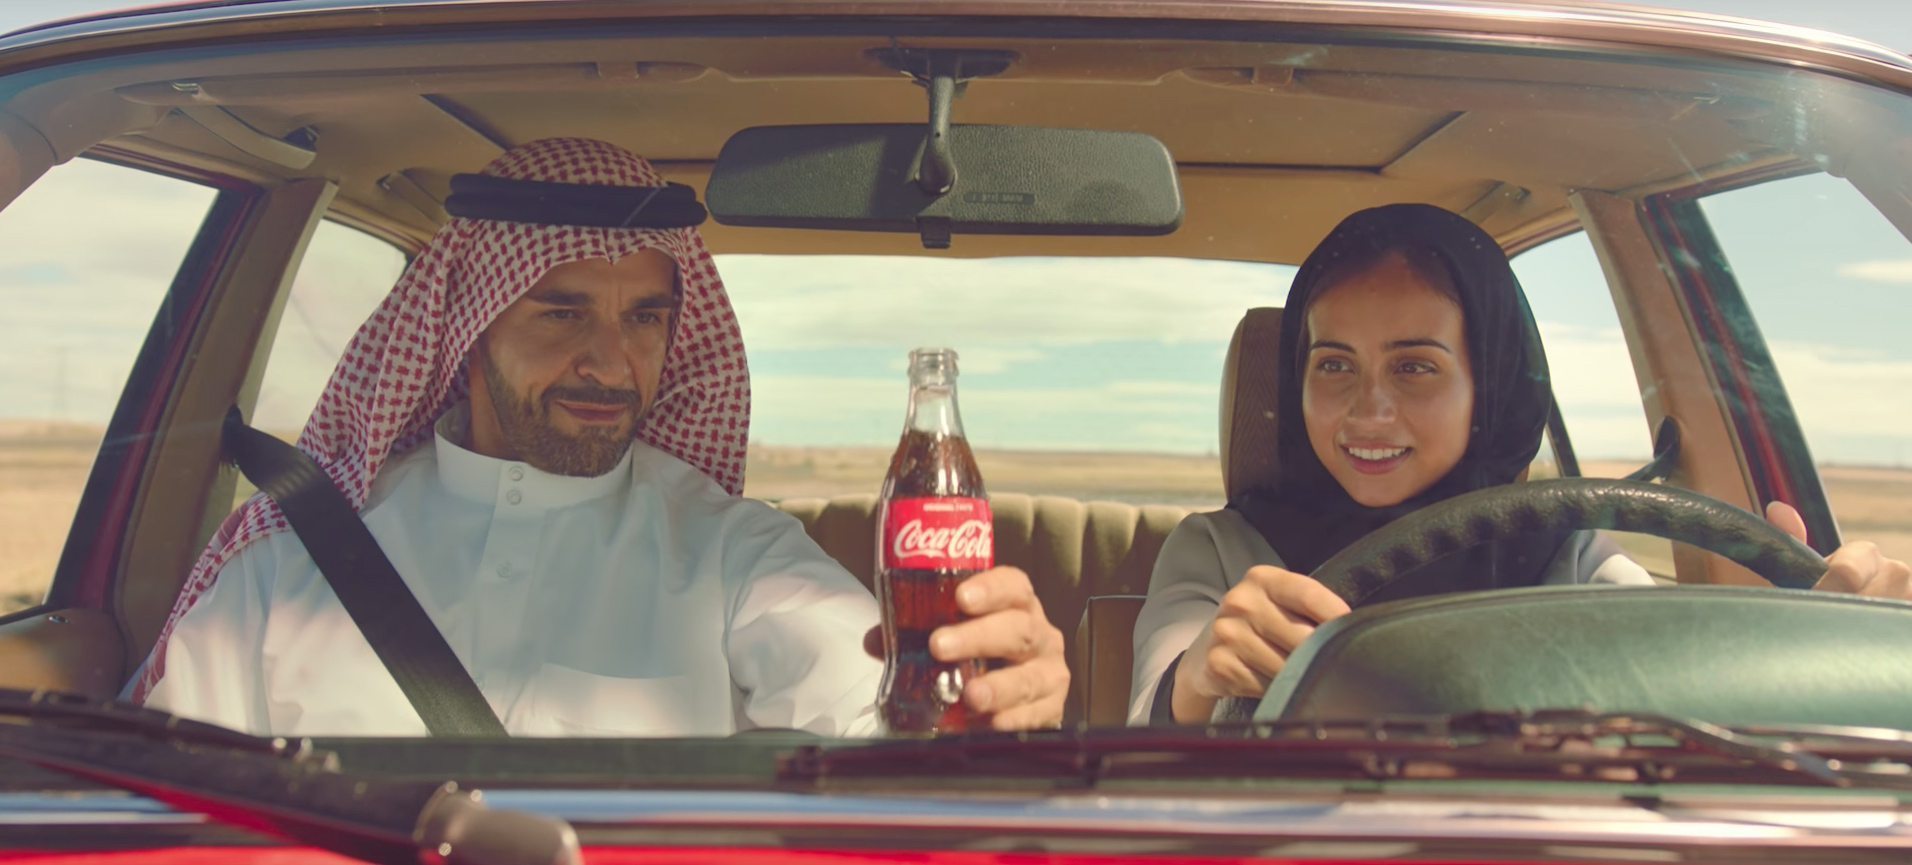 Coca Cola's new ad shows a Saudi woman learning to drive.